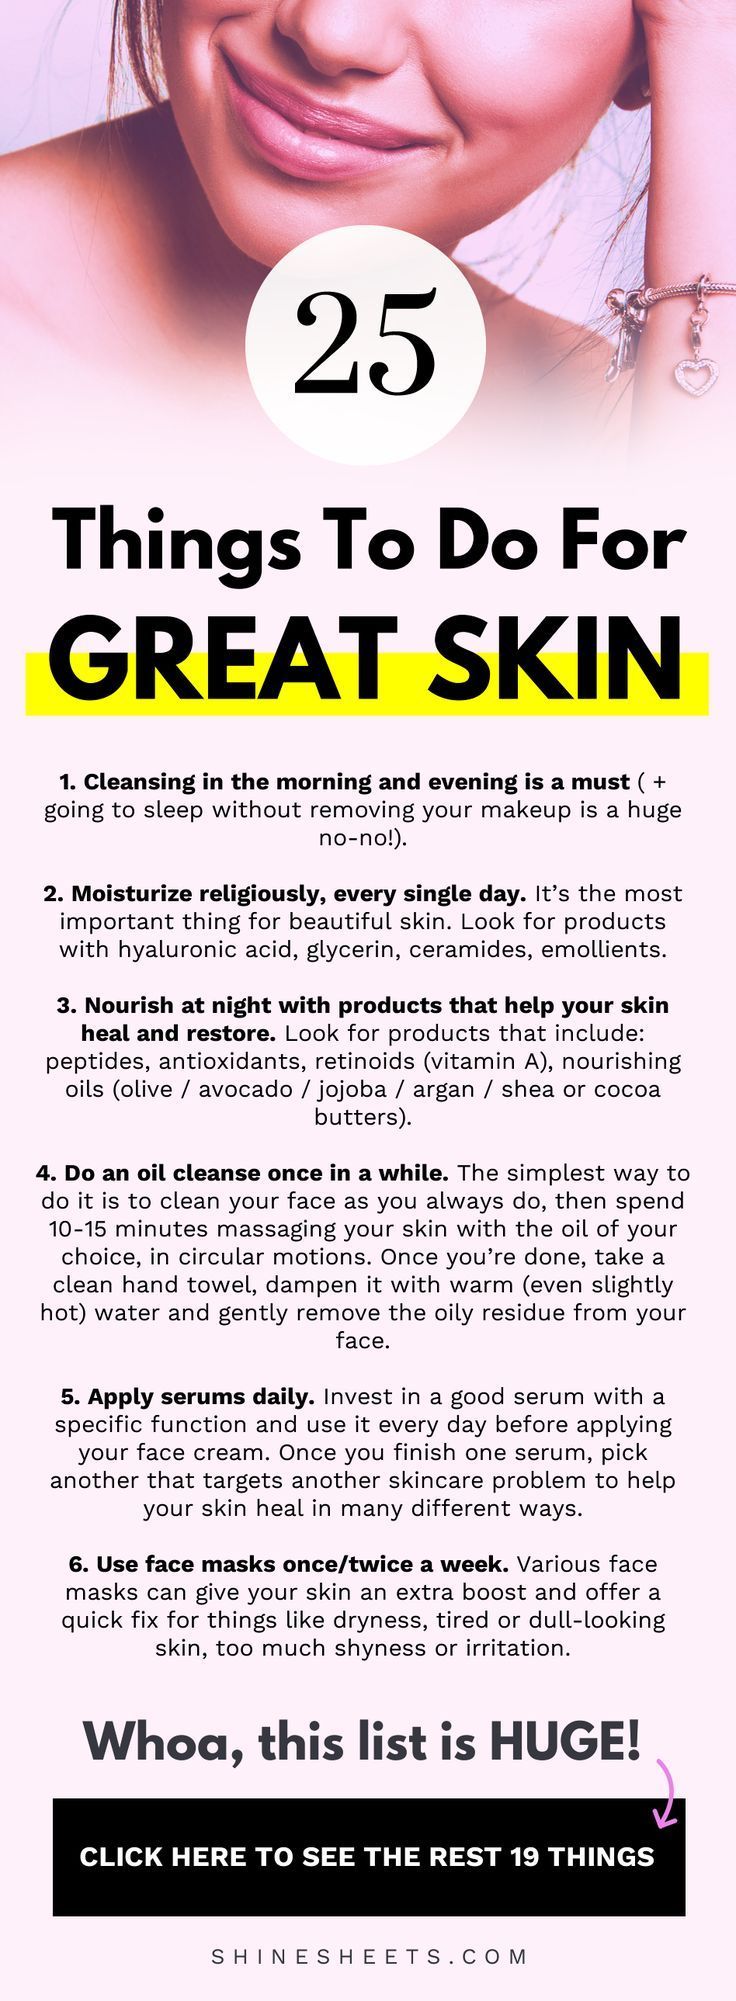 25 Things To Do For Stunning Skin | ShineSheets - 25 Things To Do For Stunning Skin | ShineSheets -   17 beauty Tips for acne ideas